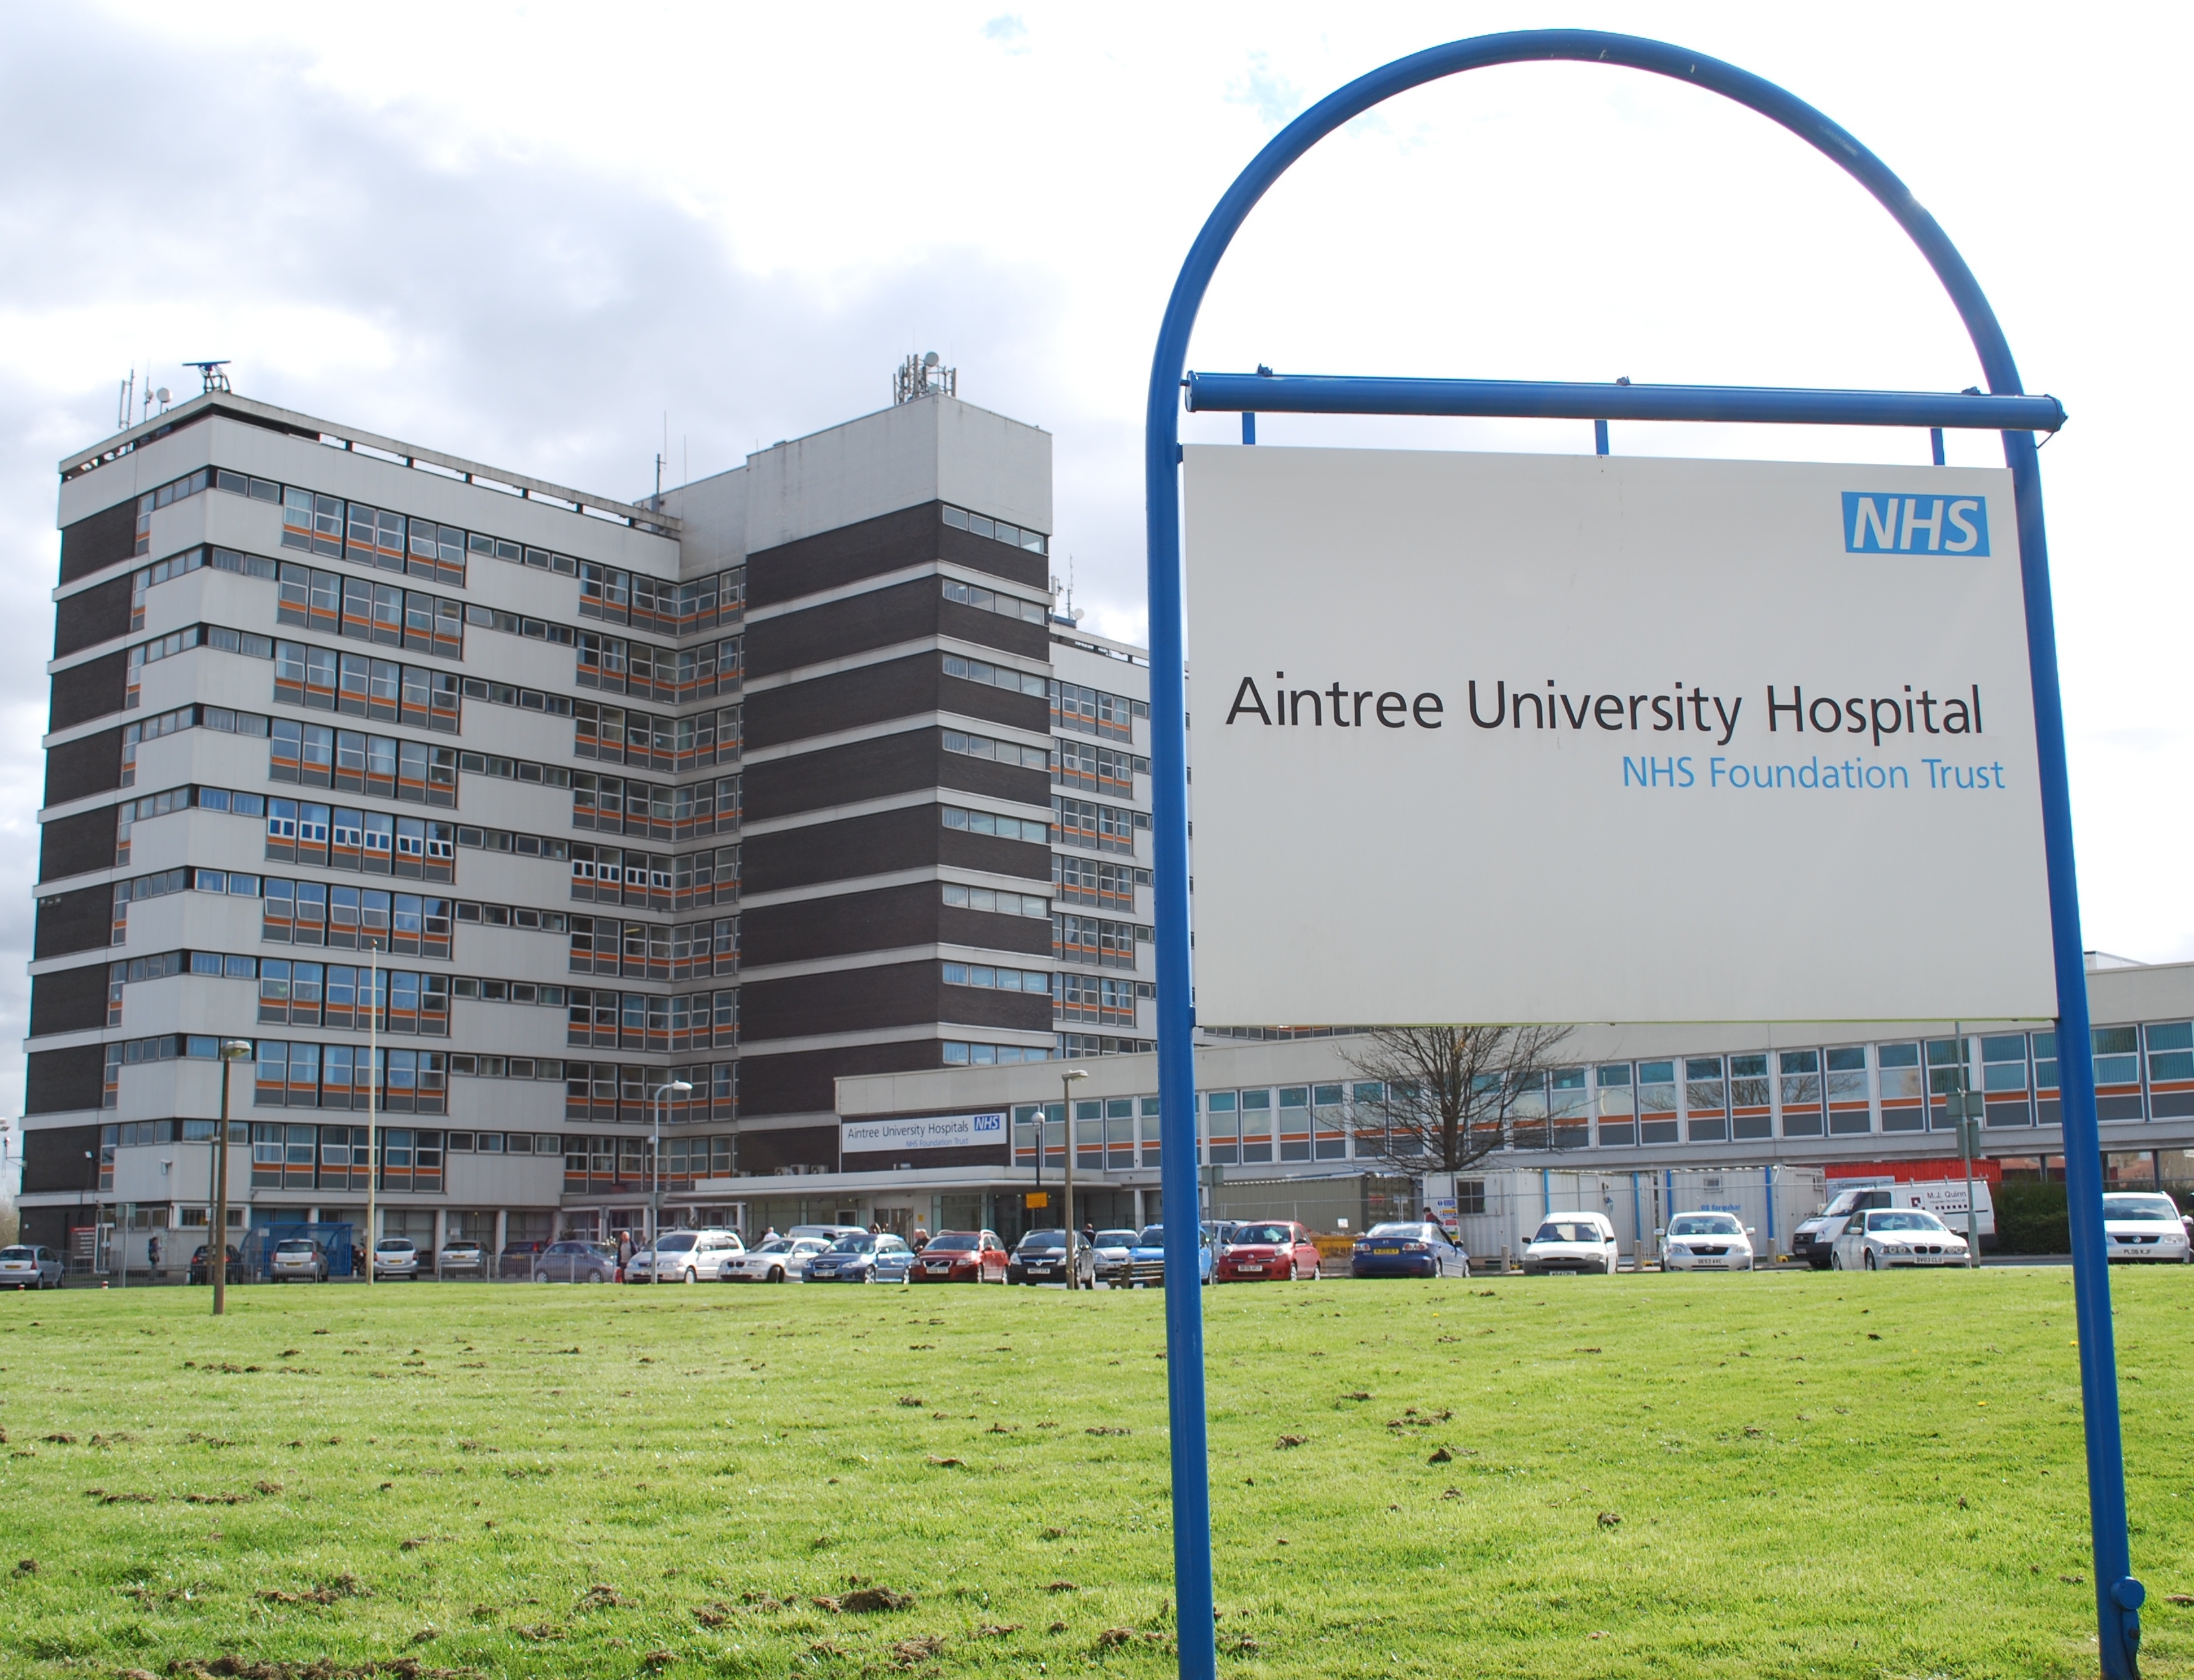 Become a Governor at Aintree University Hospital